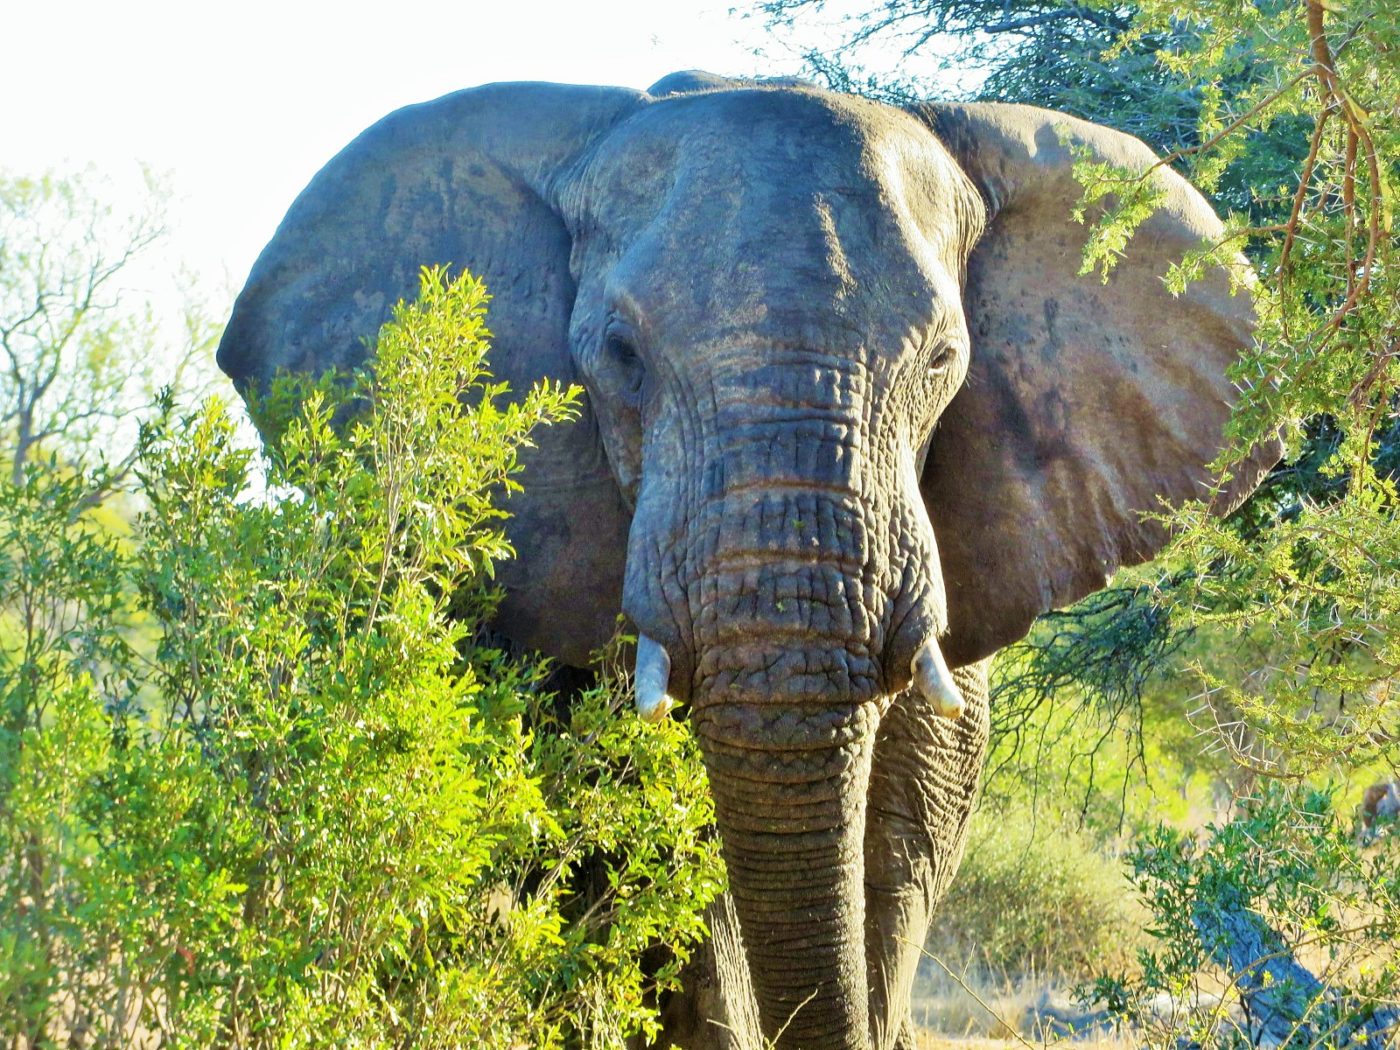 An elephant with a large face in between bushes at the Kruger Safari in South Africa